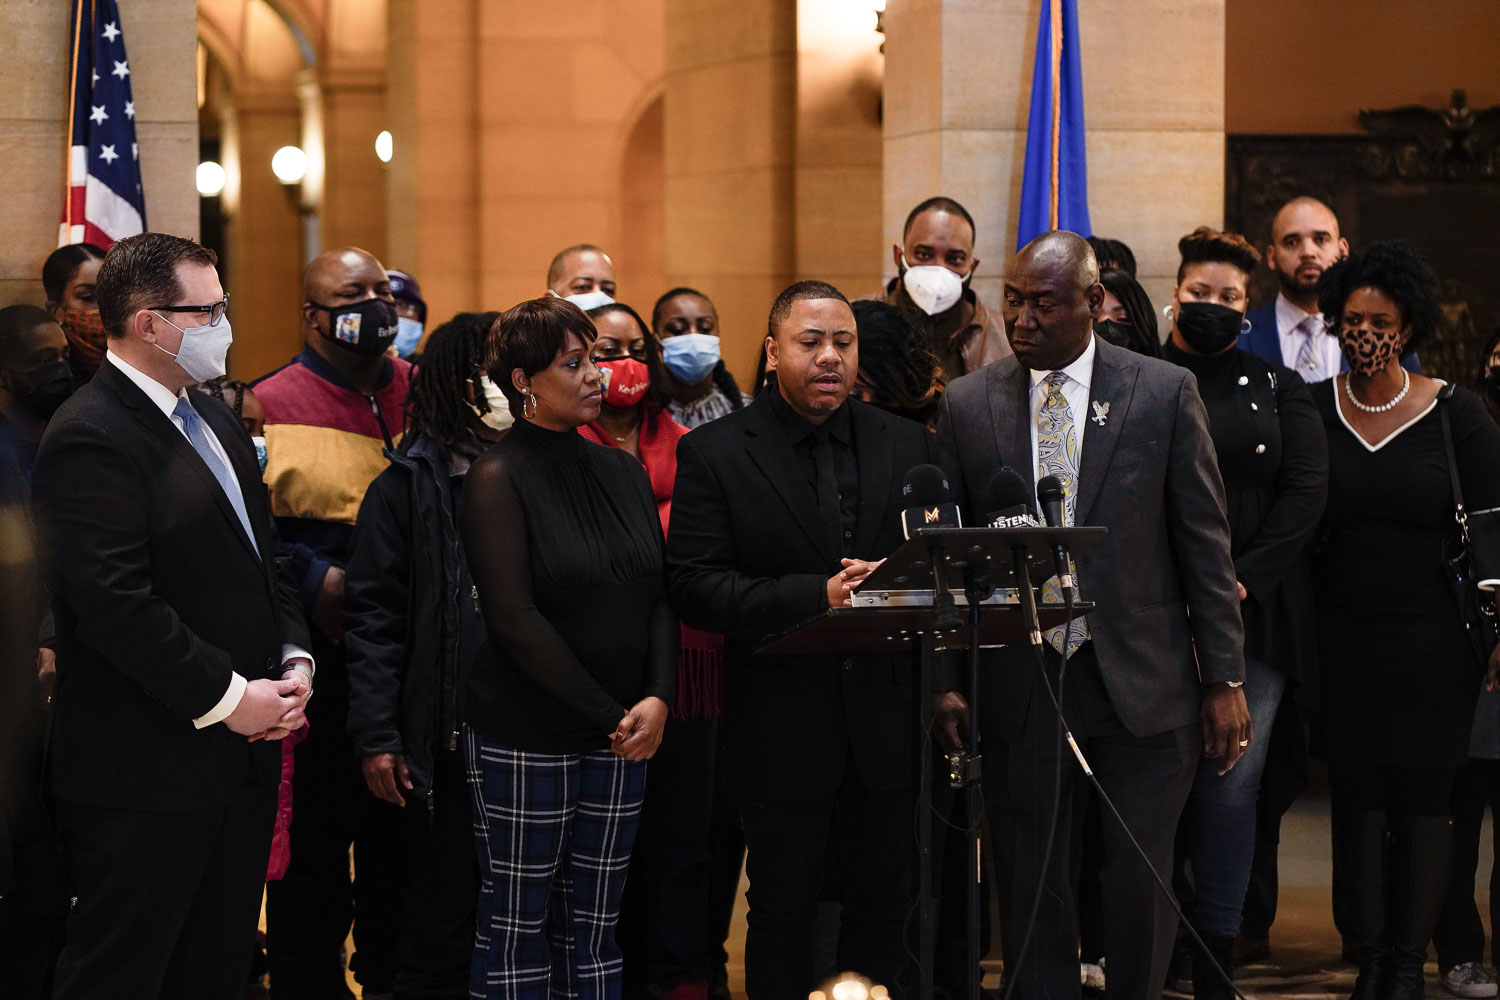 February 10, 2022 - St. Paul, Minn. -- Amir Locke’s mother joined by families of Jamar Clark, Winston Smith & others: “I gave birth to him 11/11/99. He dies 2/2/22. My son was 22. His name was Amir and we gave birth to a prince.” Collectively w/ attorney Ben Crump they ask for President Biden to ban no-knock warrants.